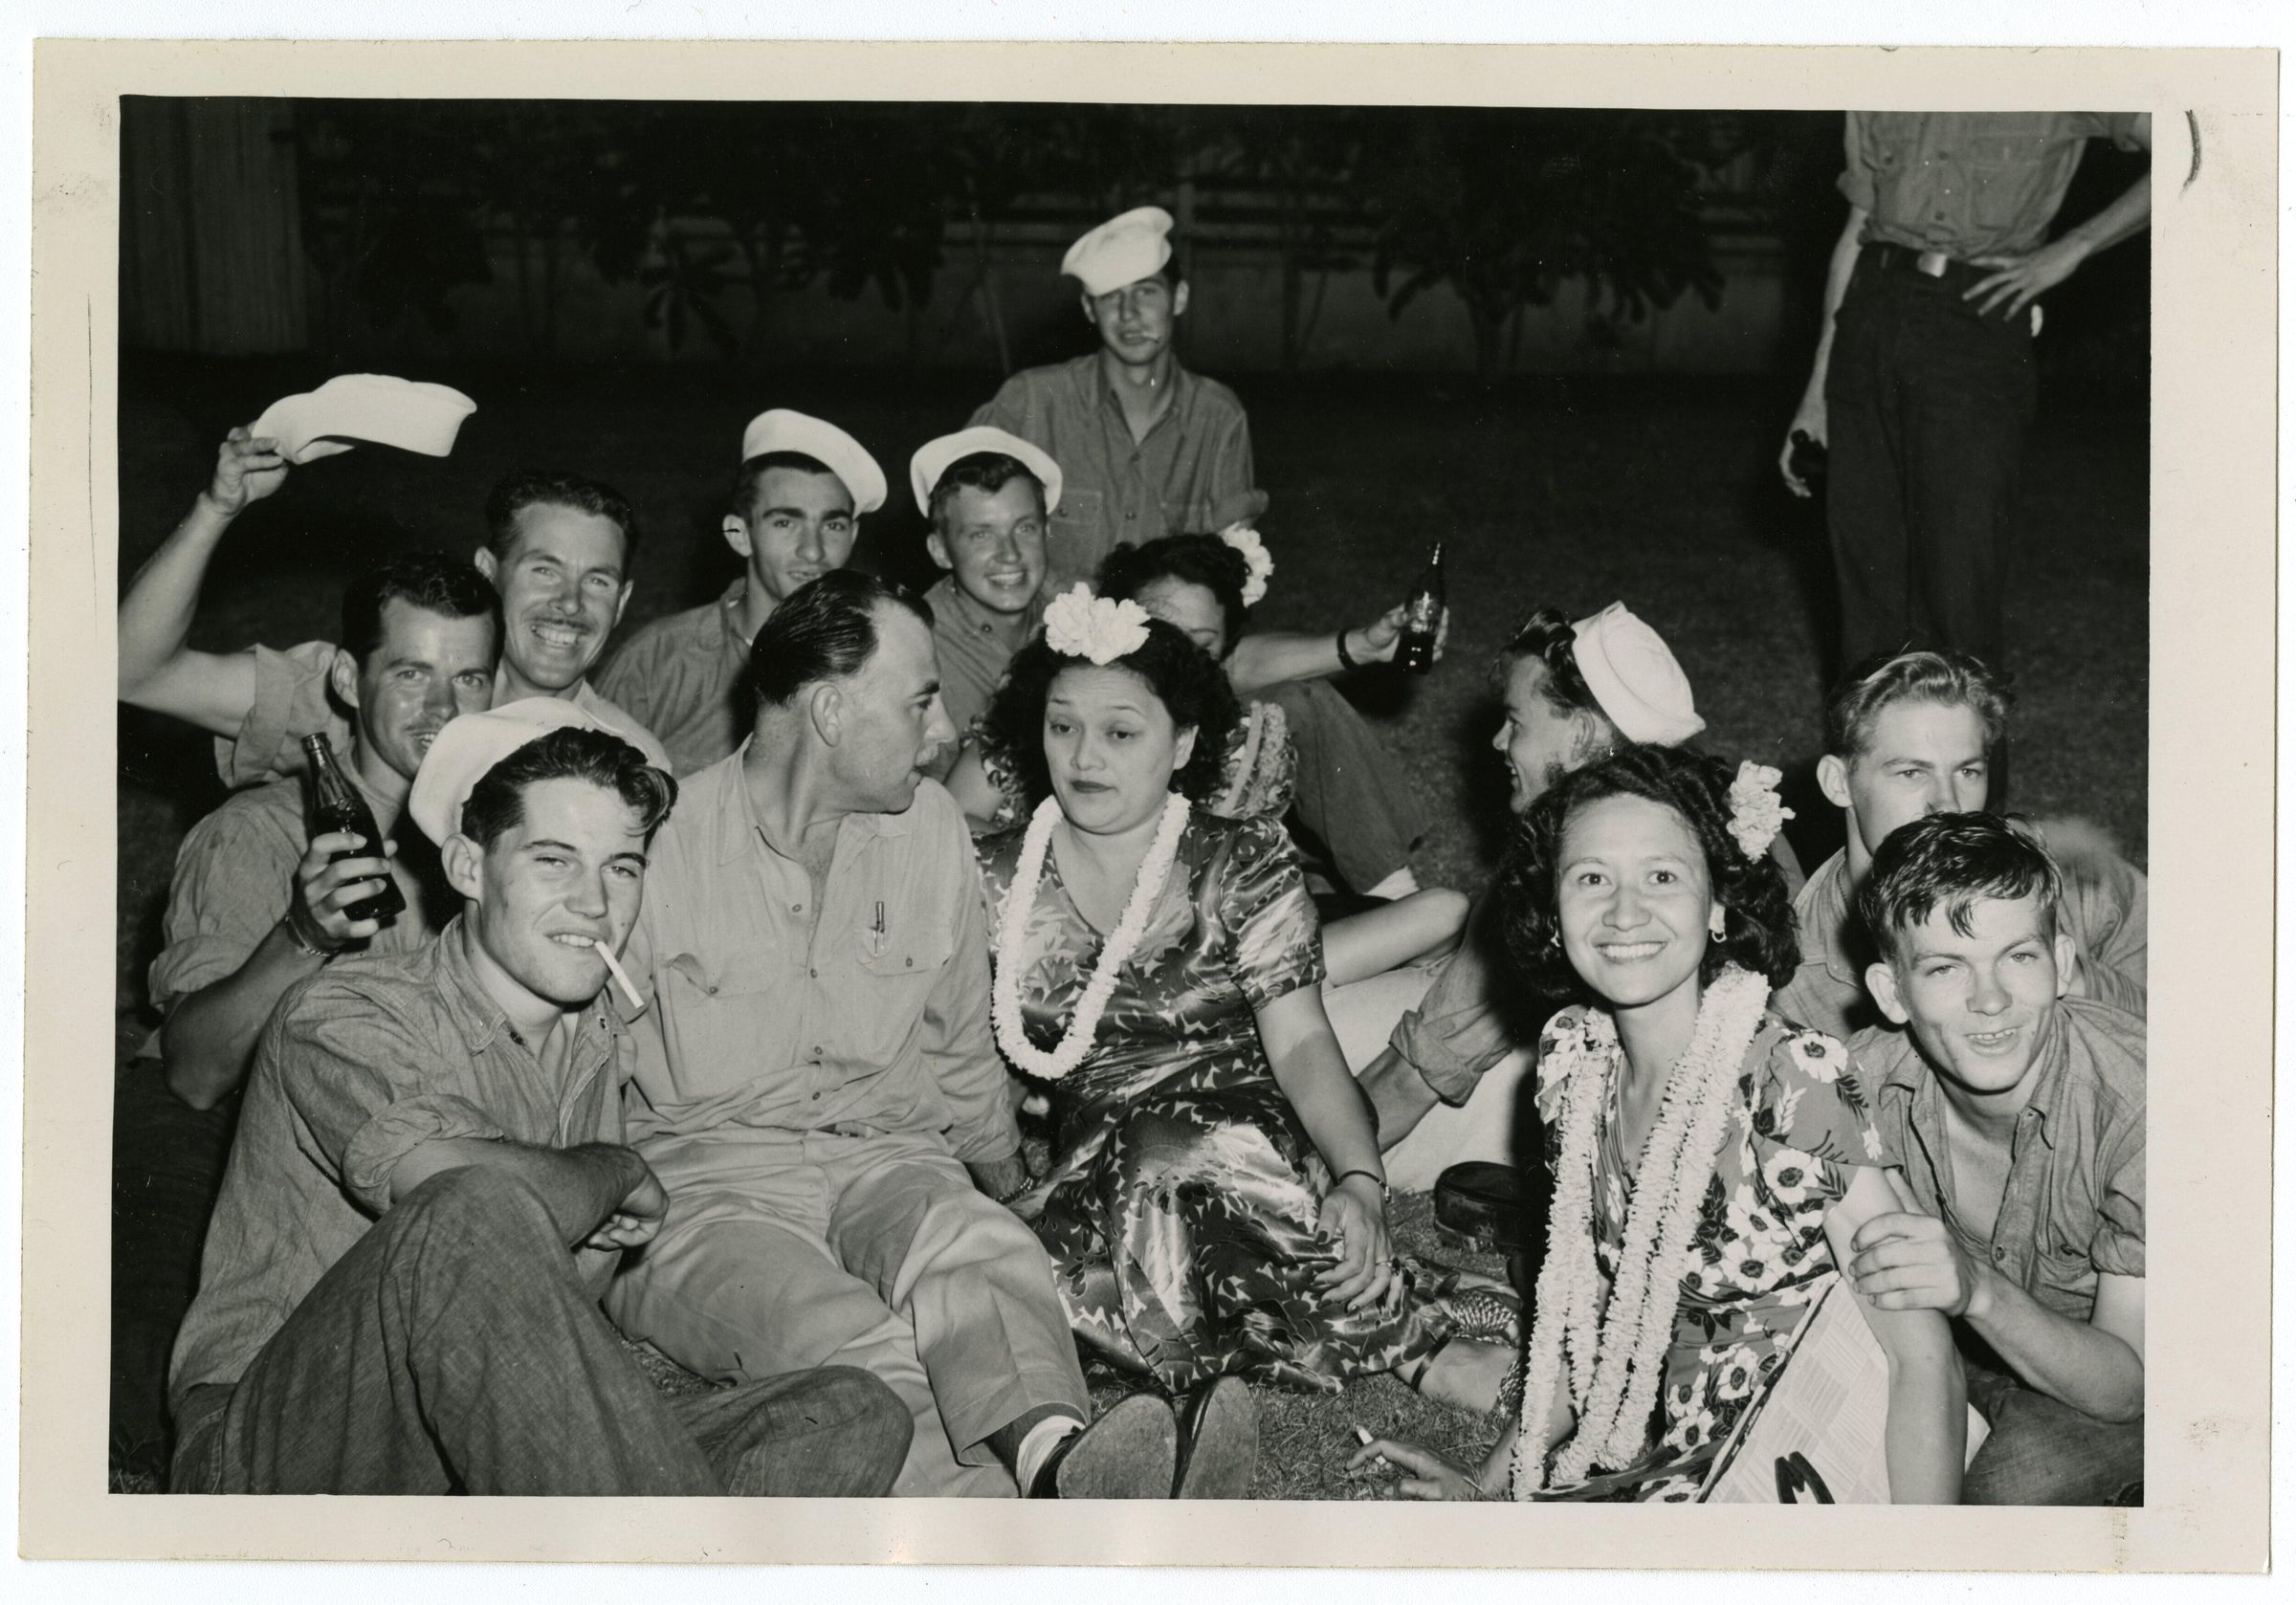 Primary Image of Sailors Enjoying a Shore Party in Hawaii